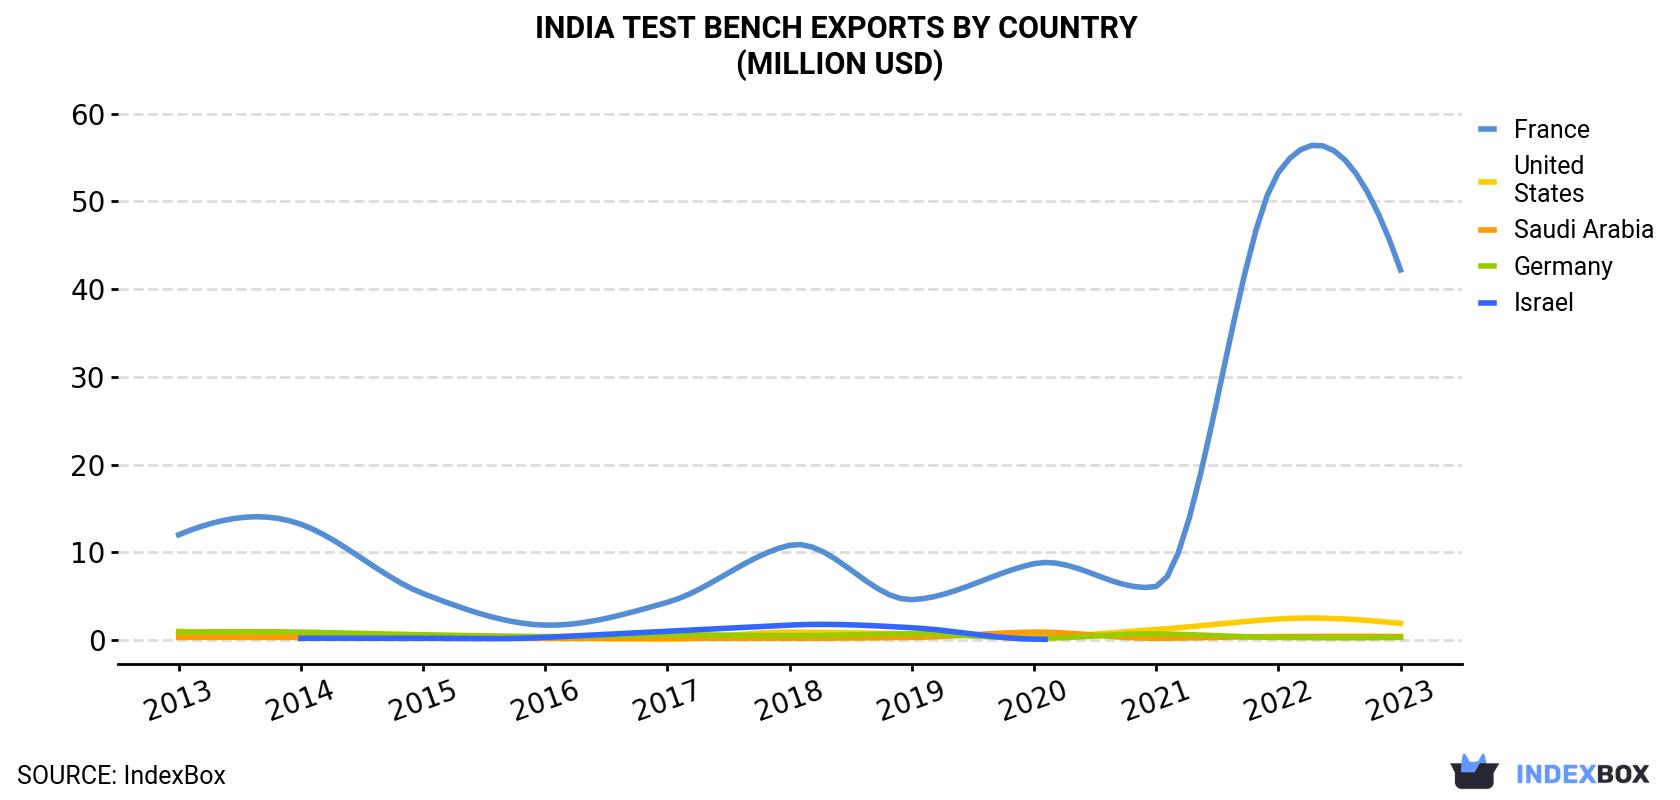 India Test Bench Exports By Country (Million USD)